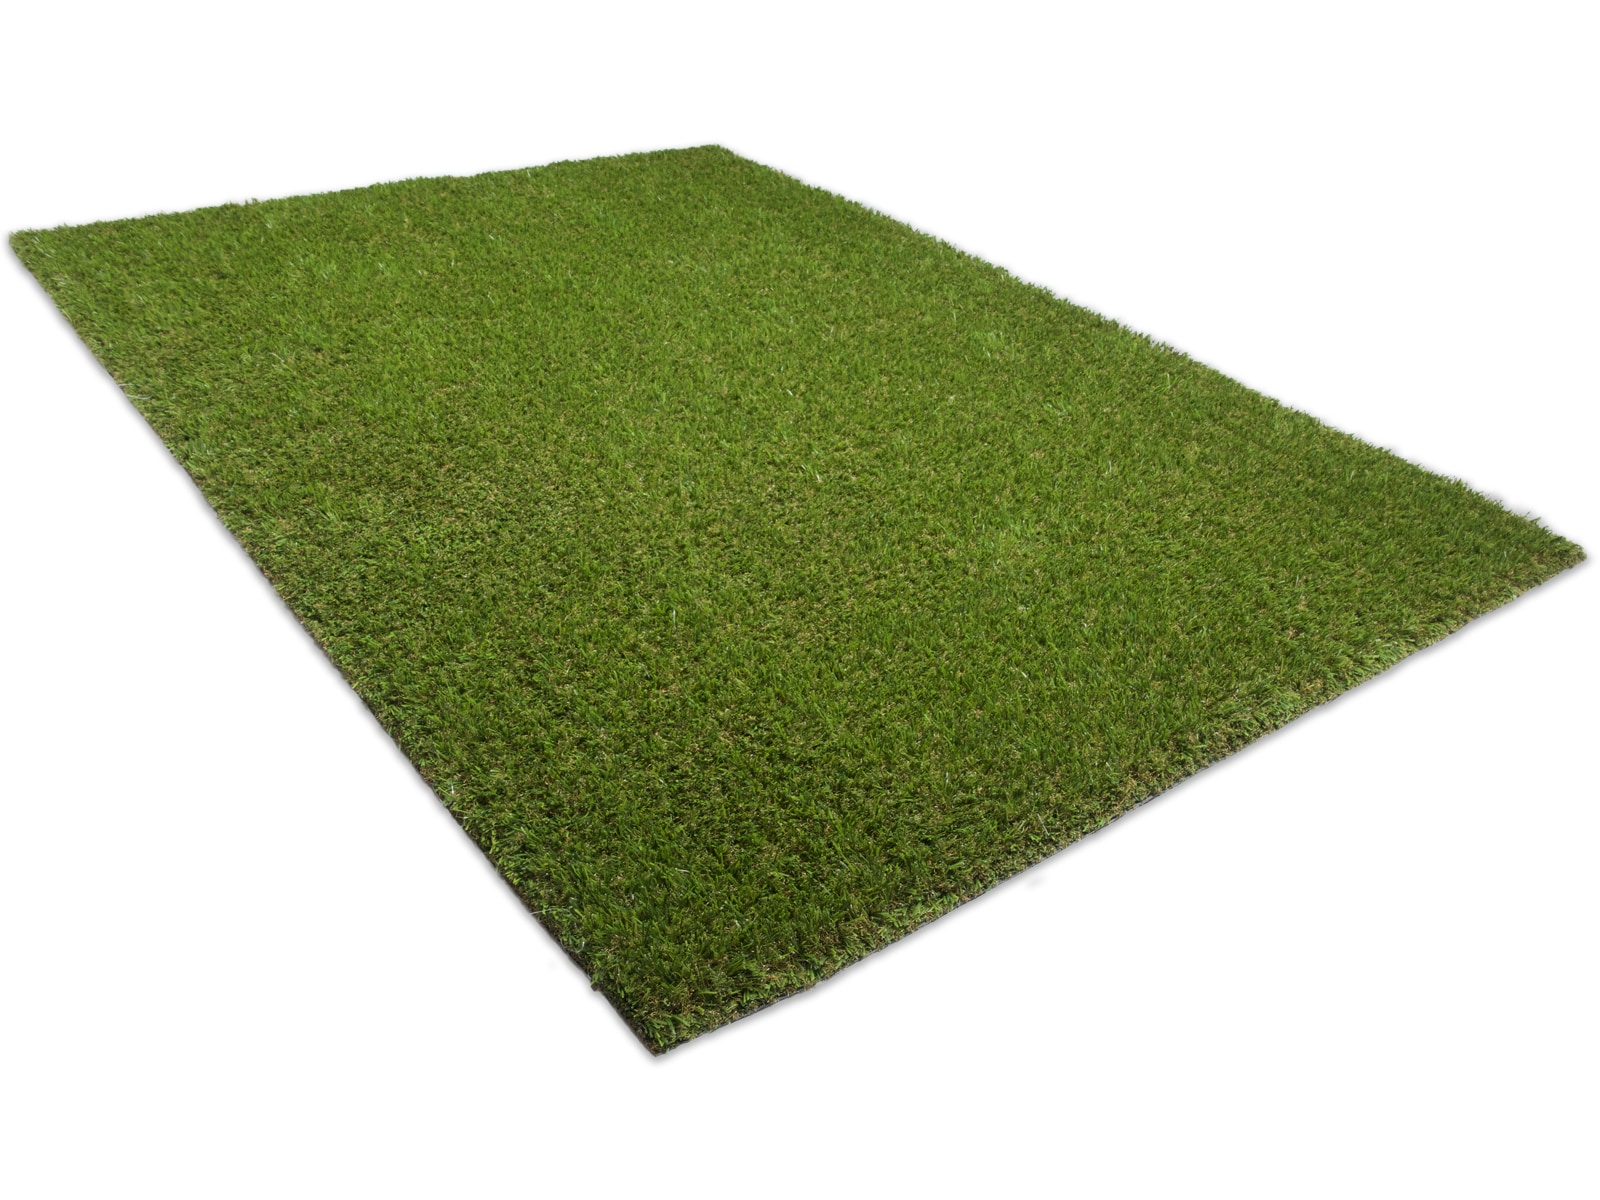 SYNLawn Landscape 5-ft x 7.5-ft Artificial Grass in the Artificial